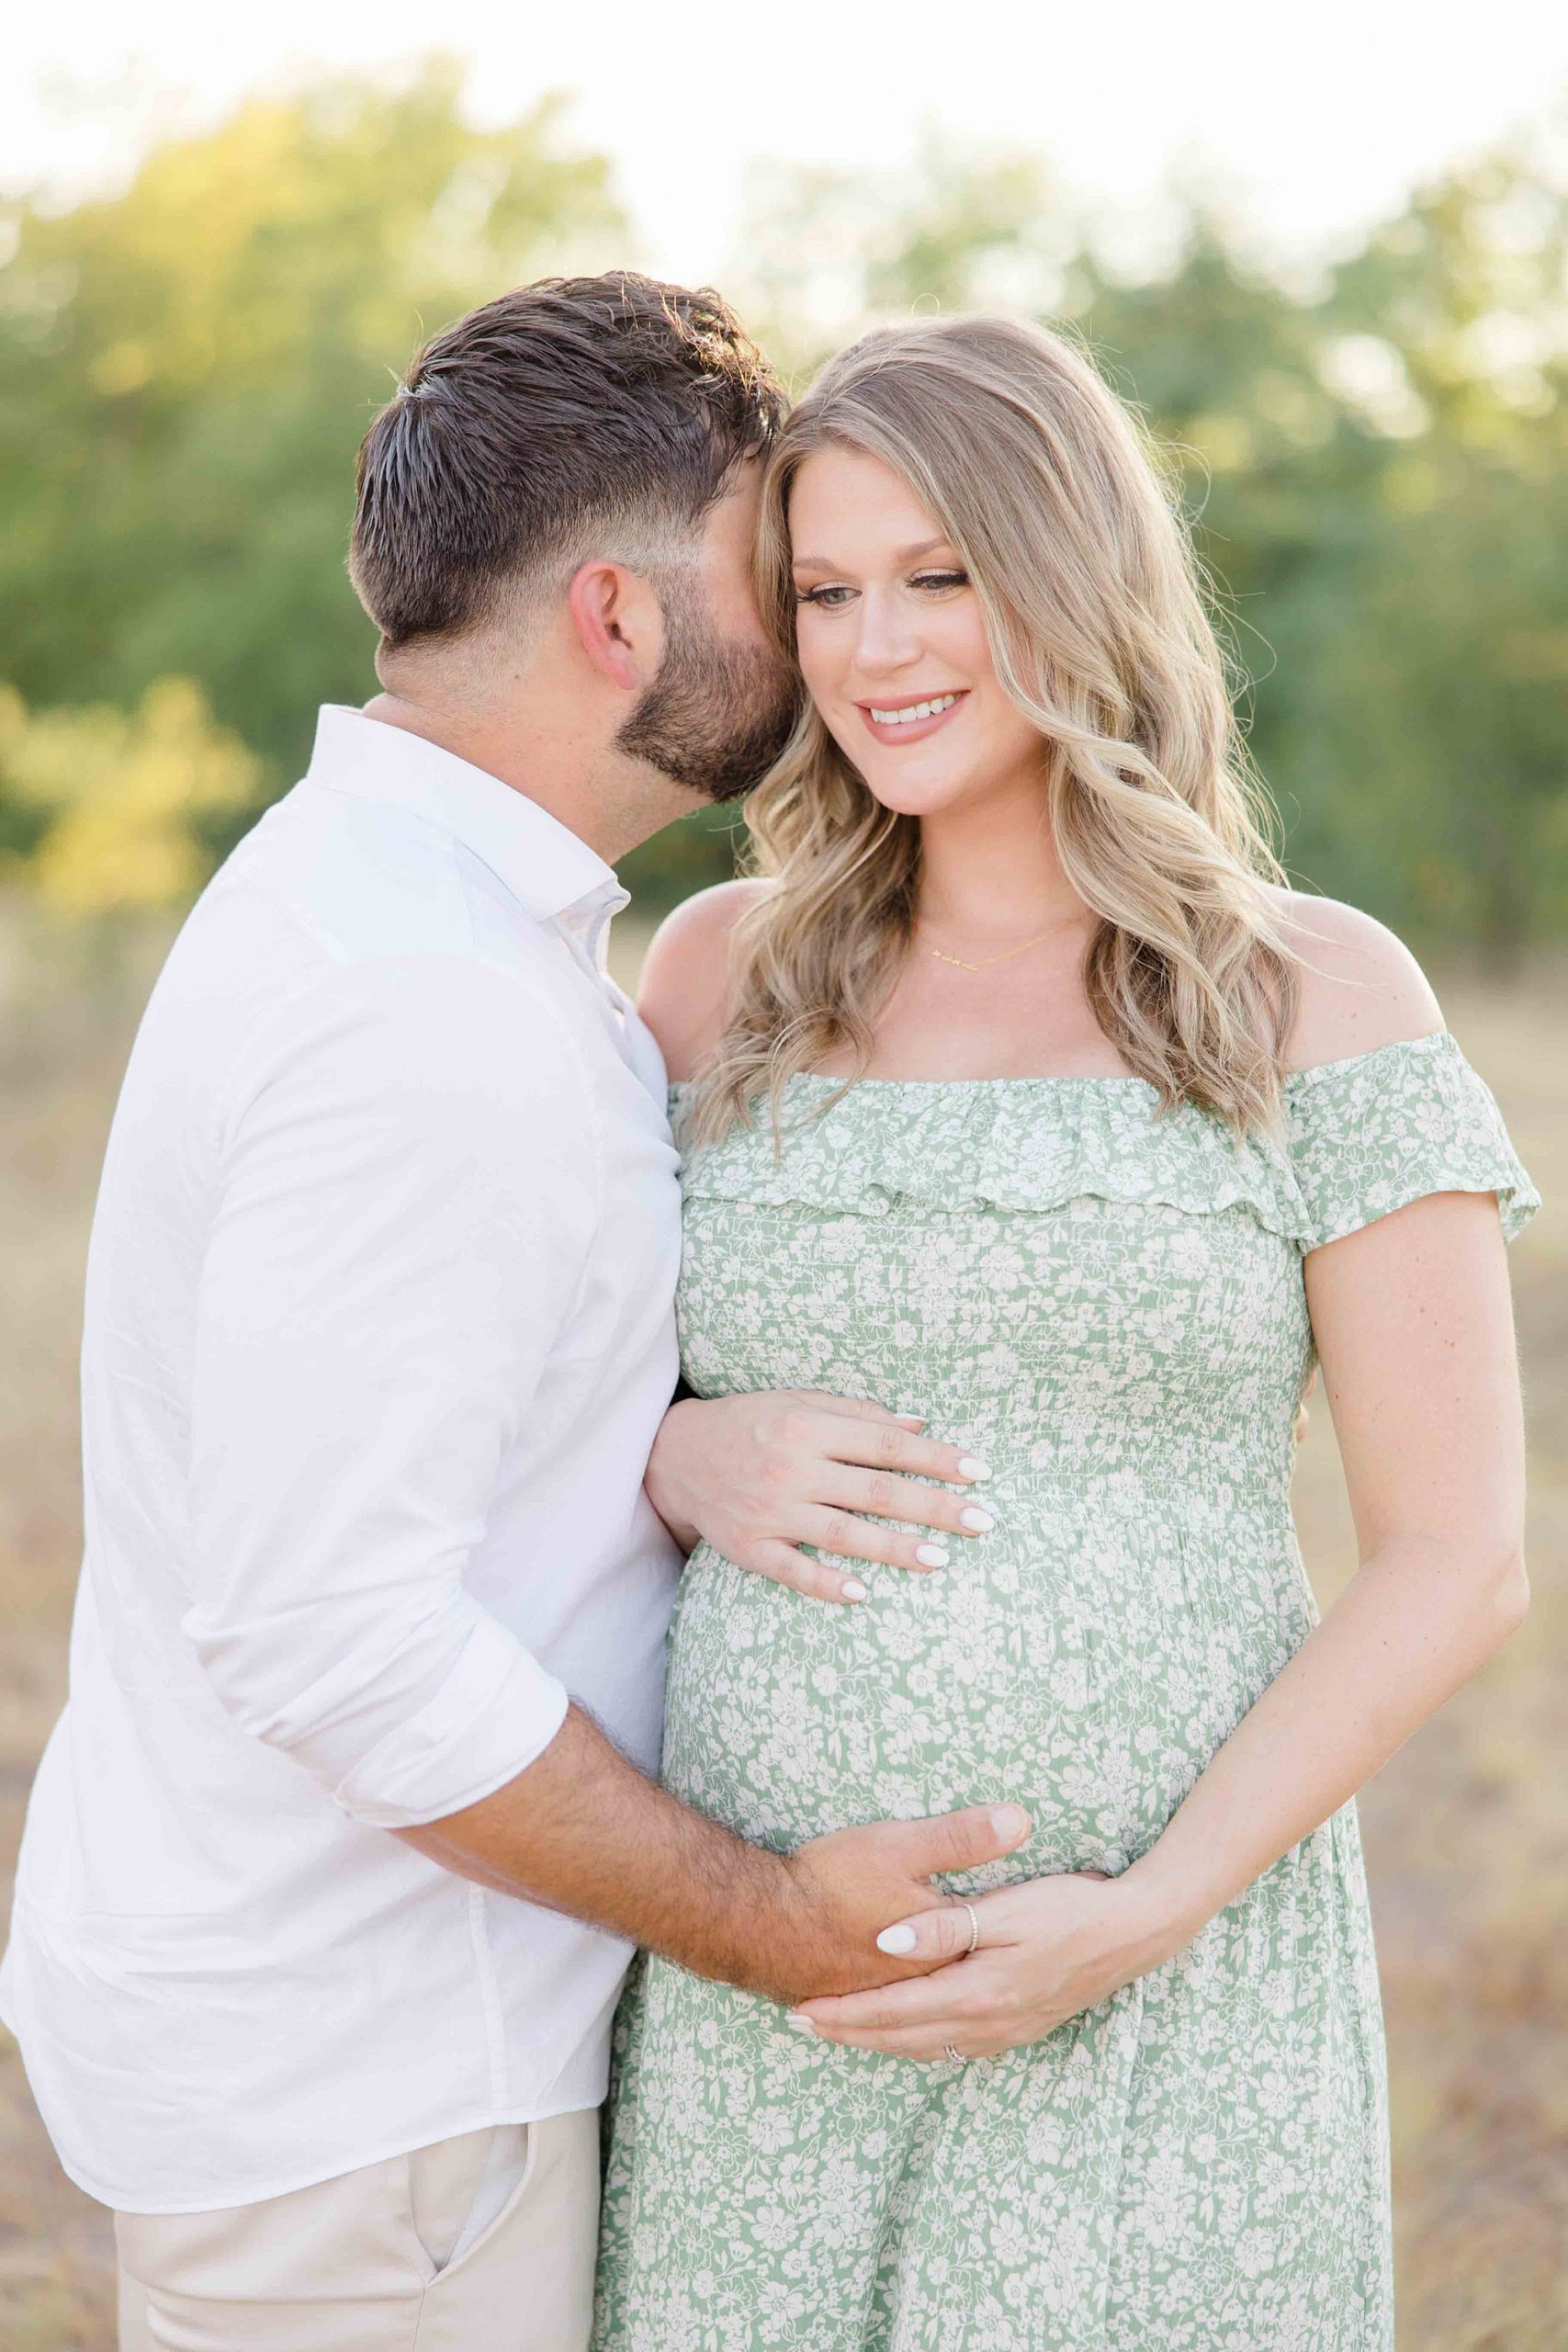 woman smiles while husband kisses her cheek while holding baby bump